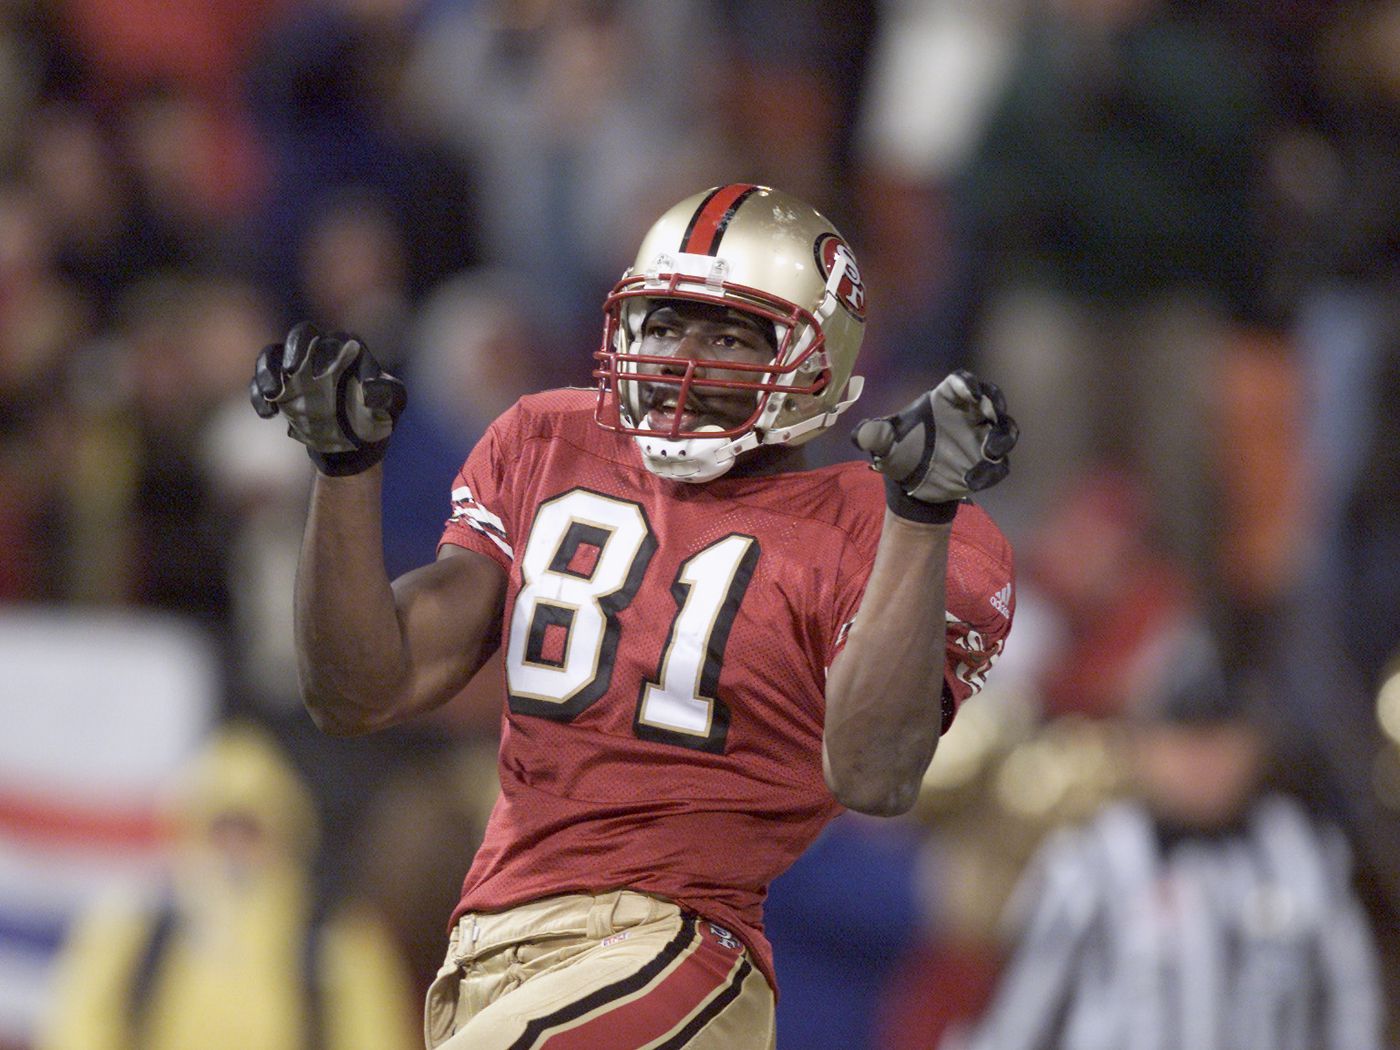 Former Eagle Terrell Owens earns HOF selection on the third try